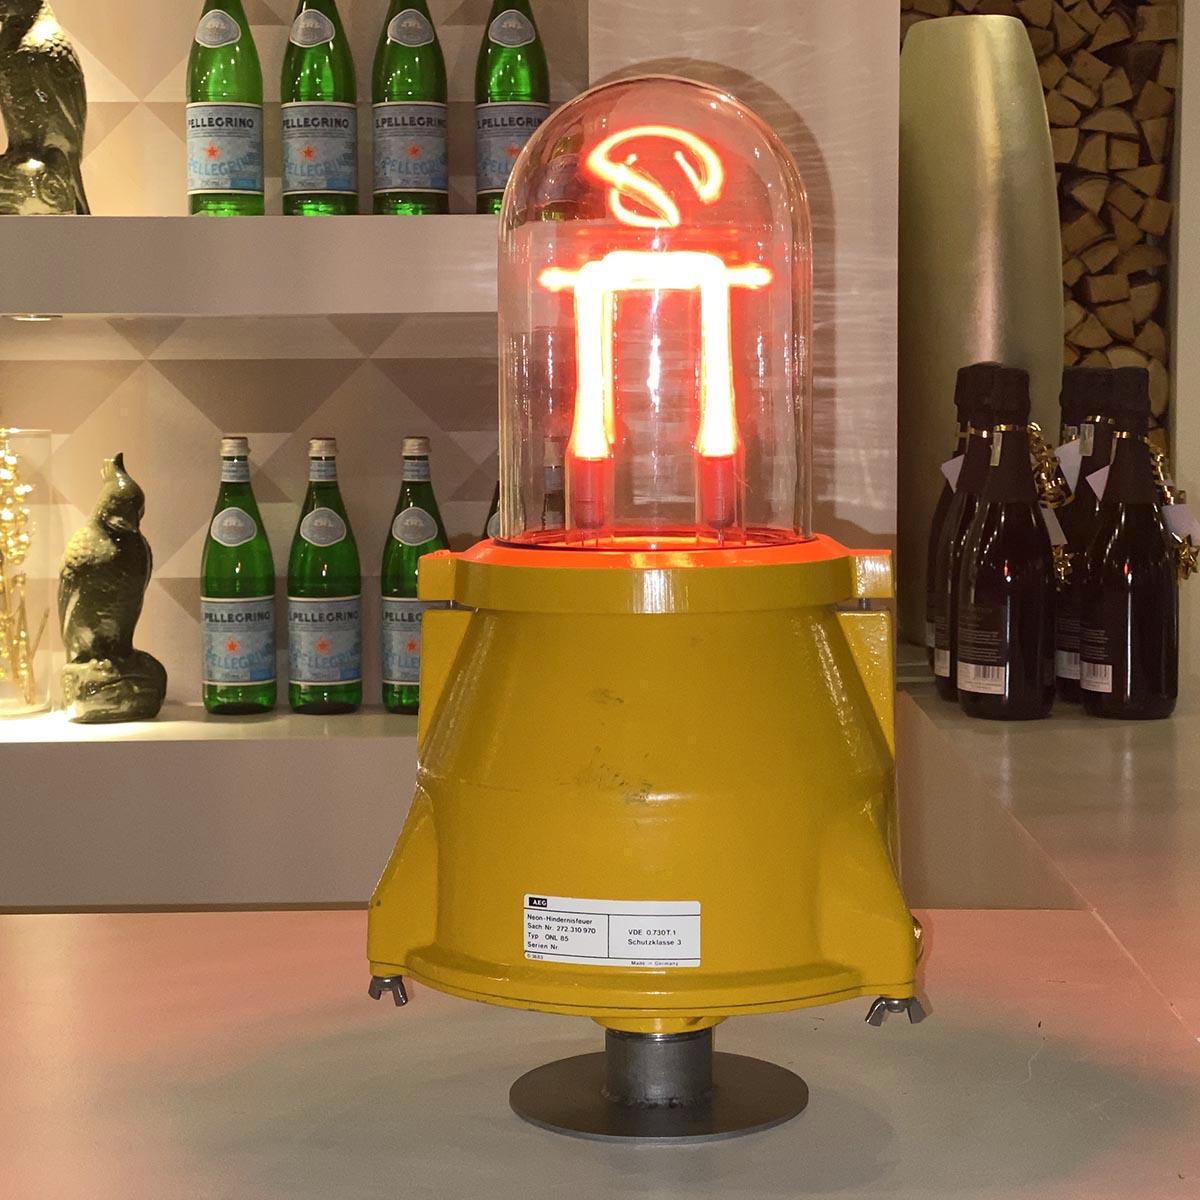 AEG Berlin airport obstruction light in use as a light in a bar.